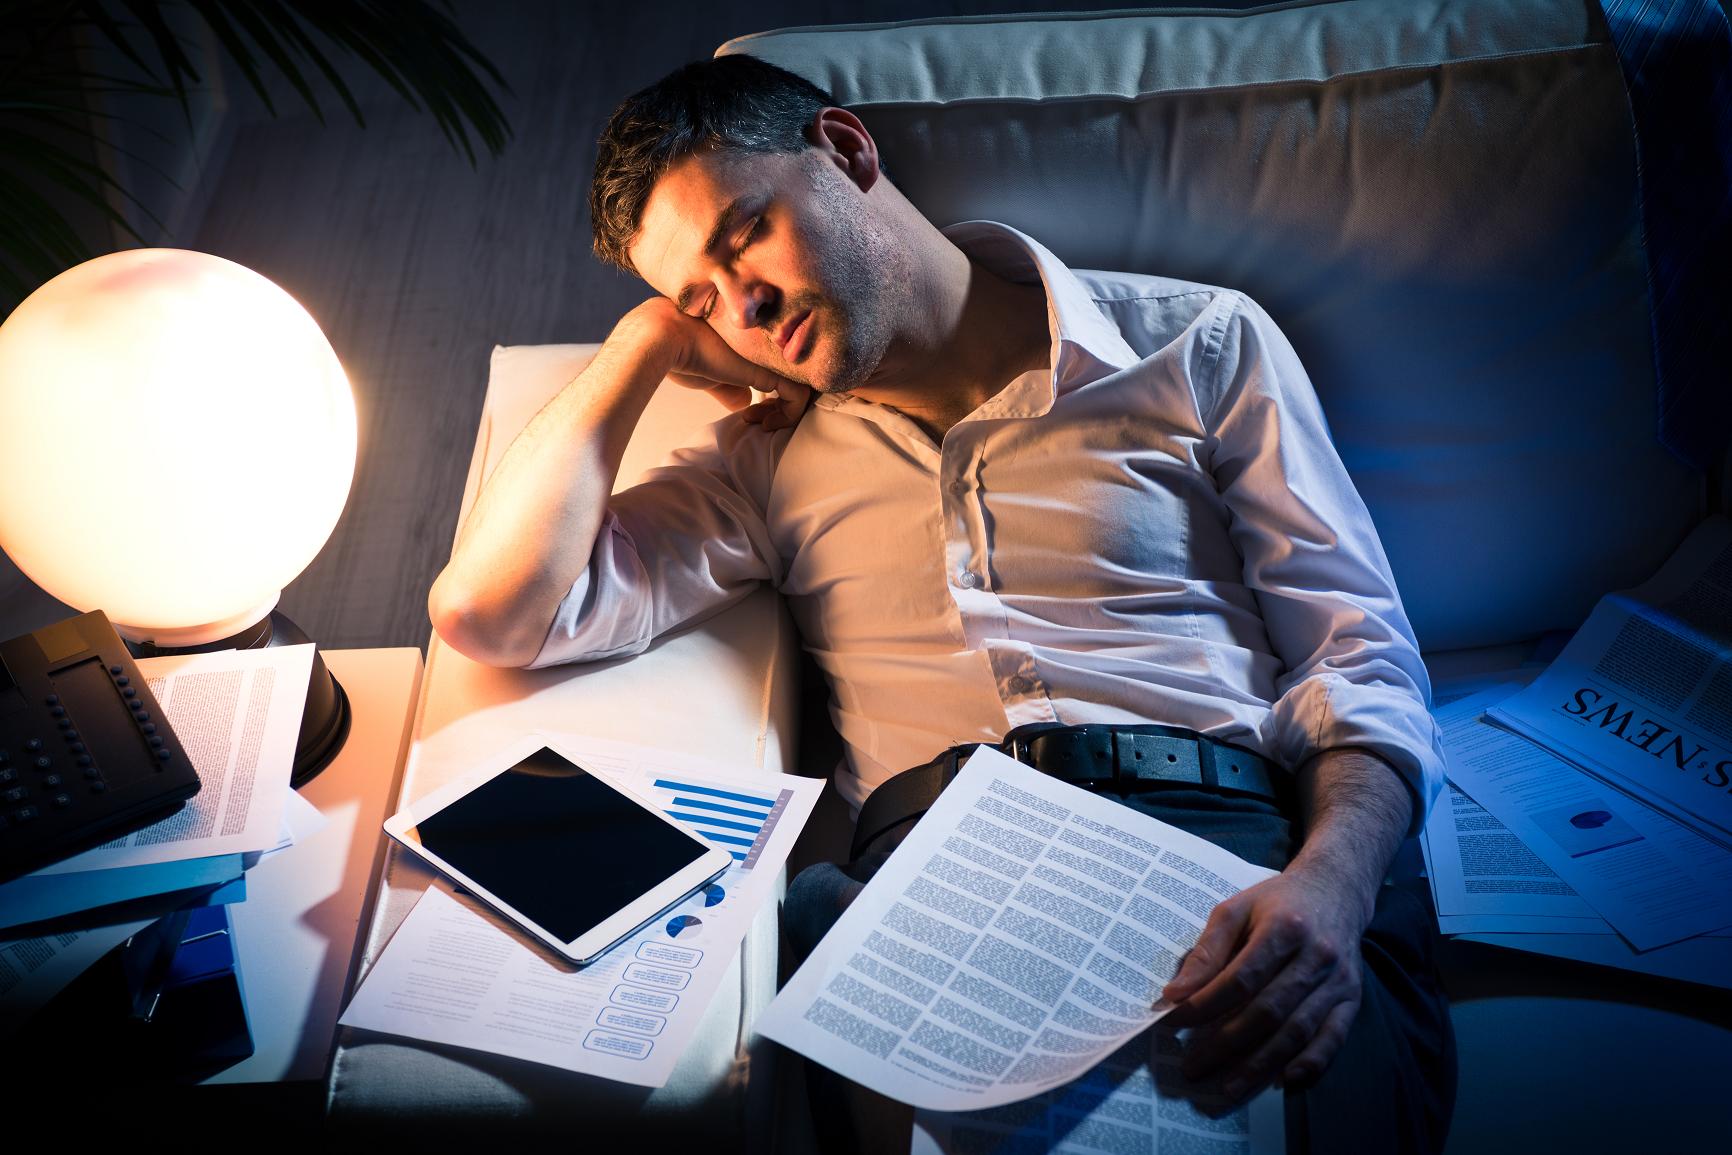 Tired businessman sleeping on sofa at home surrounded by paperwork.